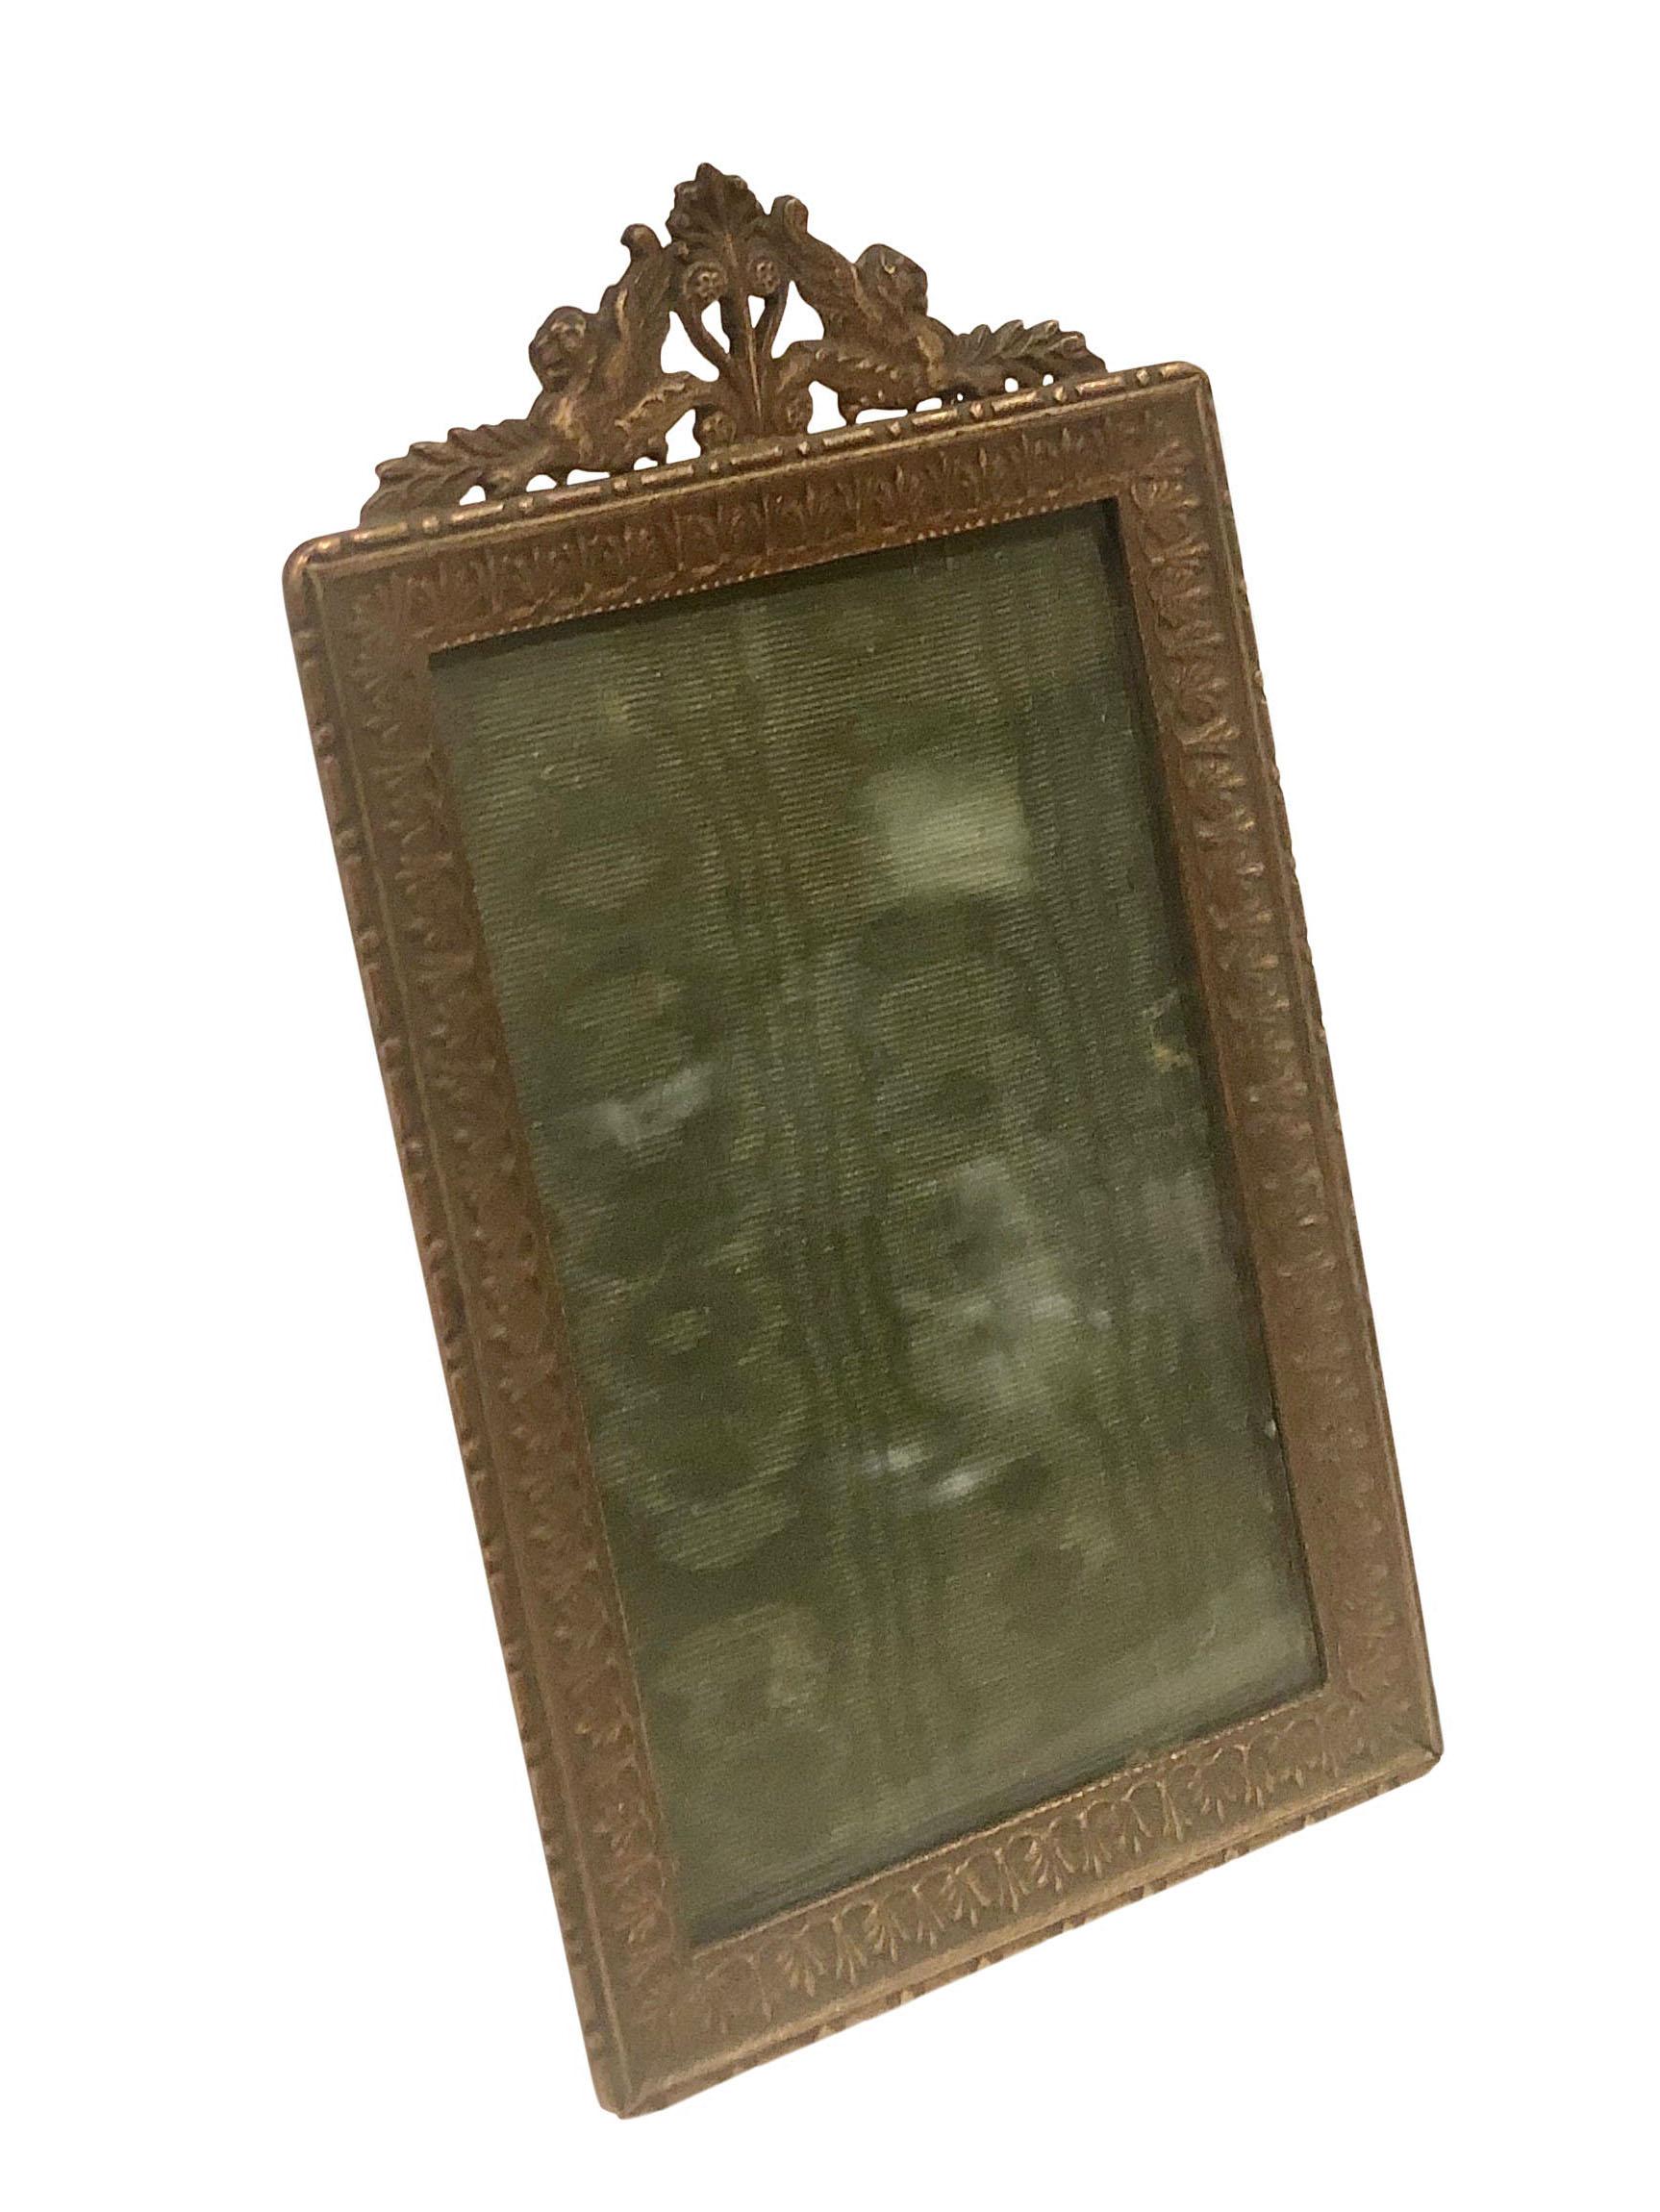 A bronze empire style small picture frame is from the turn of the century. The precious frame still has its original silk moire fabric inside from when it was sold.